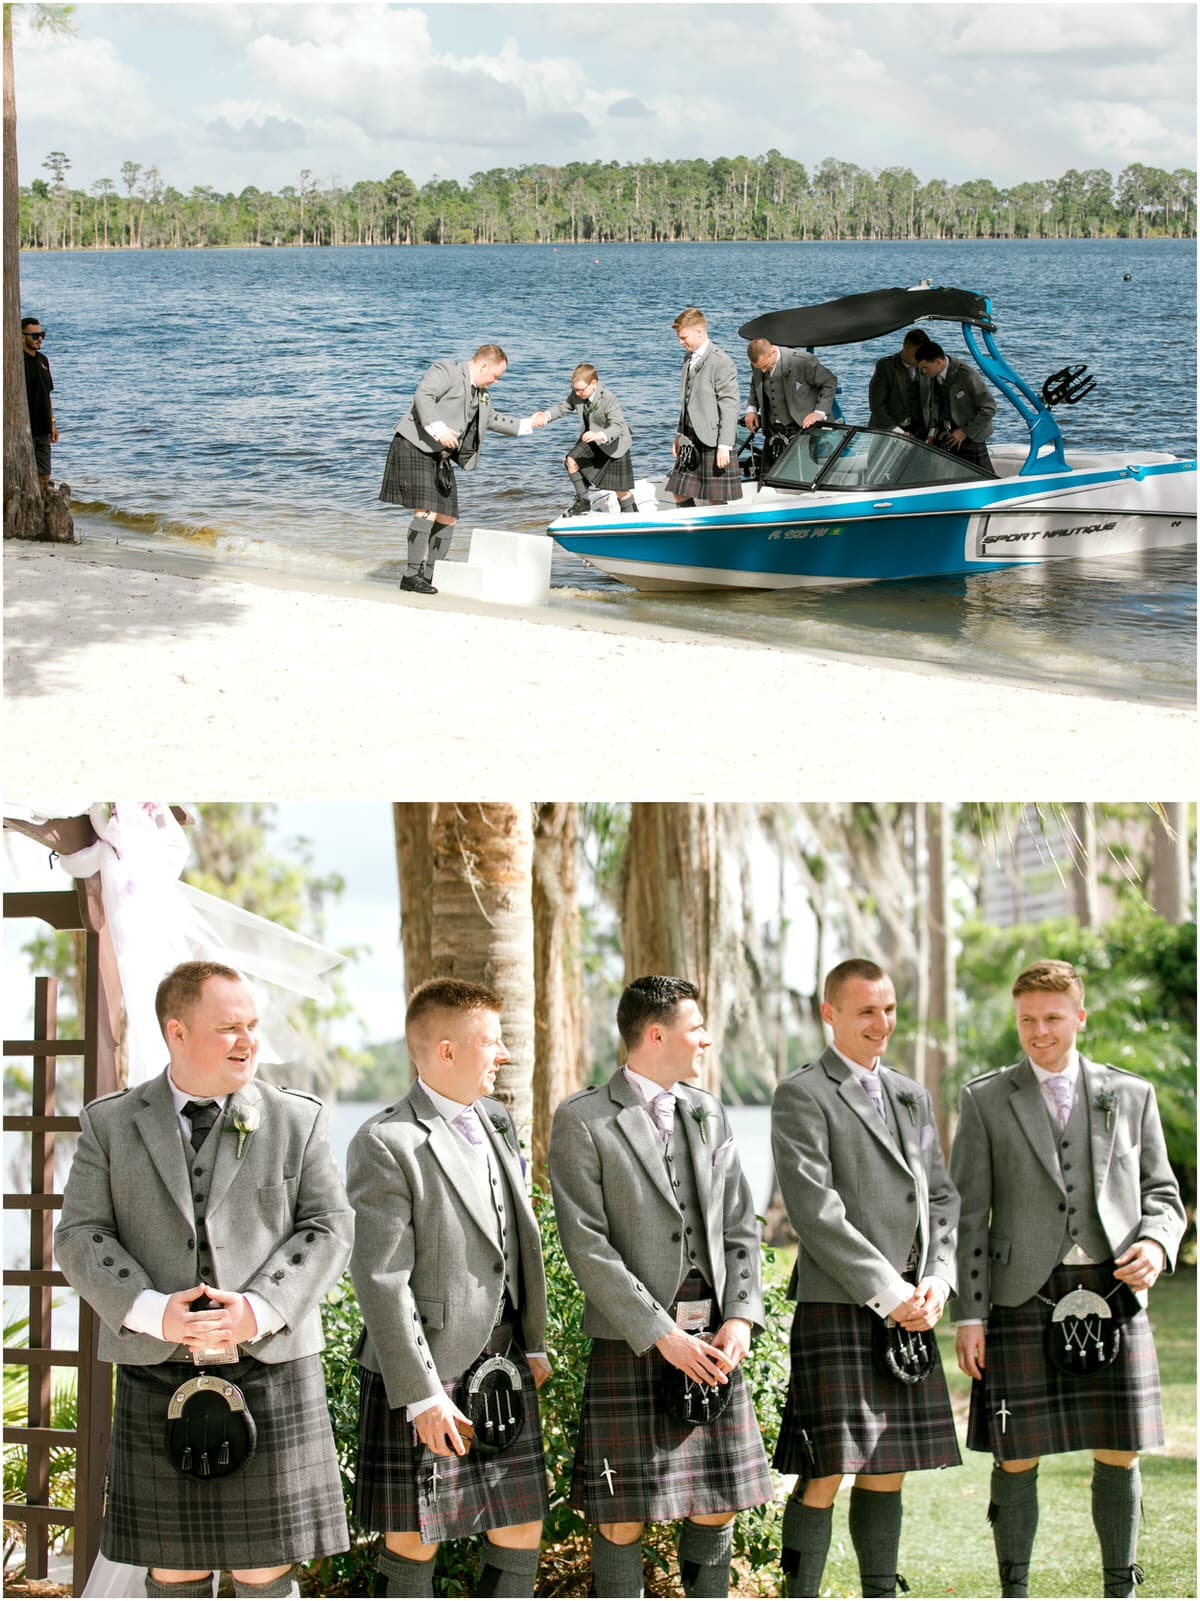 Groom and groomsmen getting off the boat and waiting for the bride to walk down the aisle. 